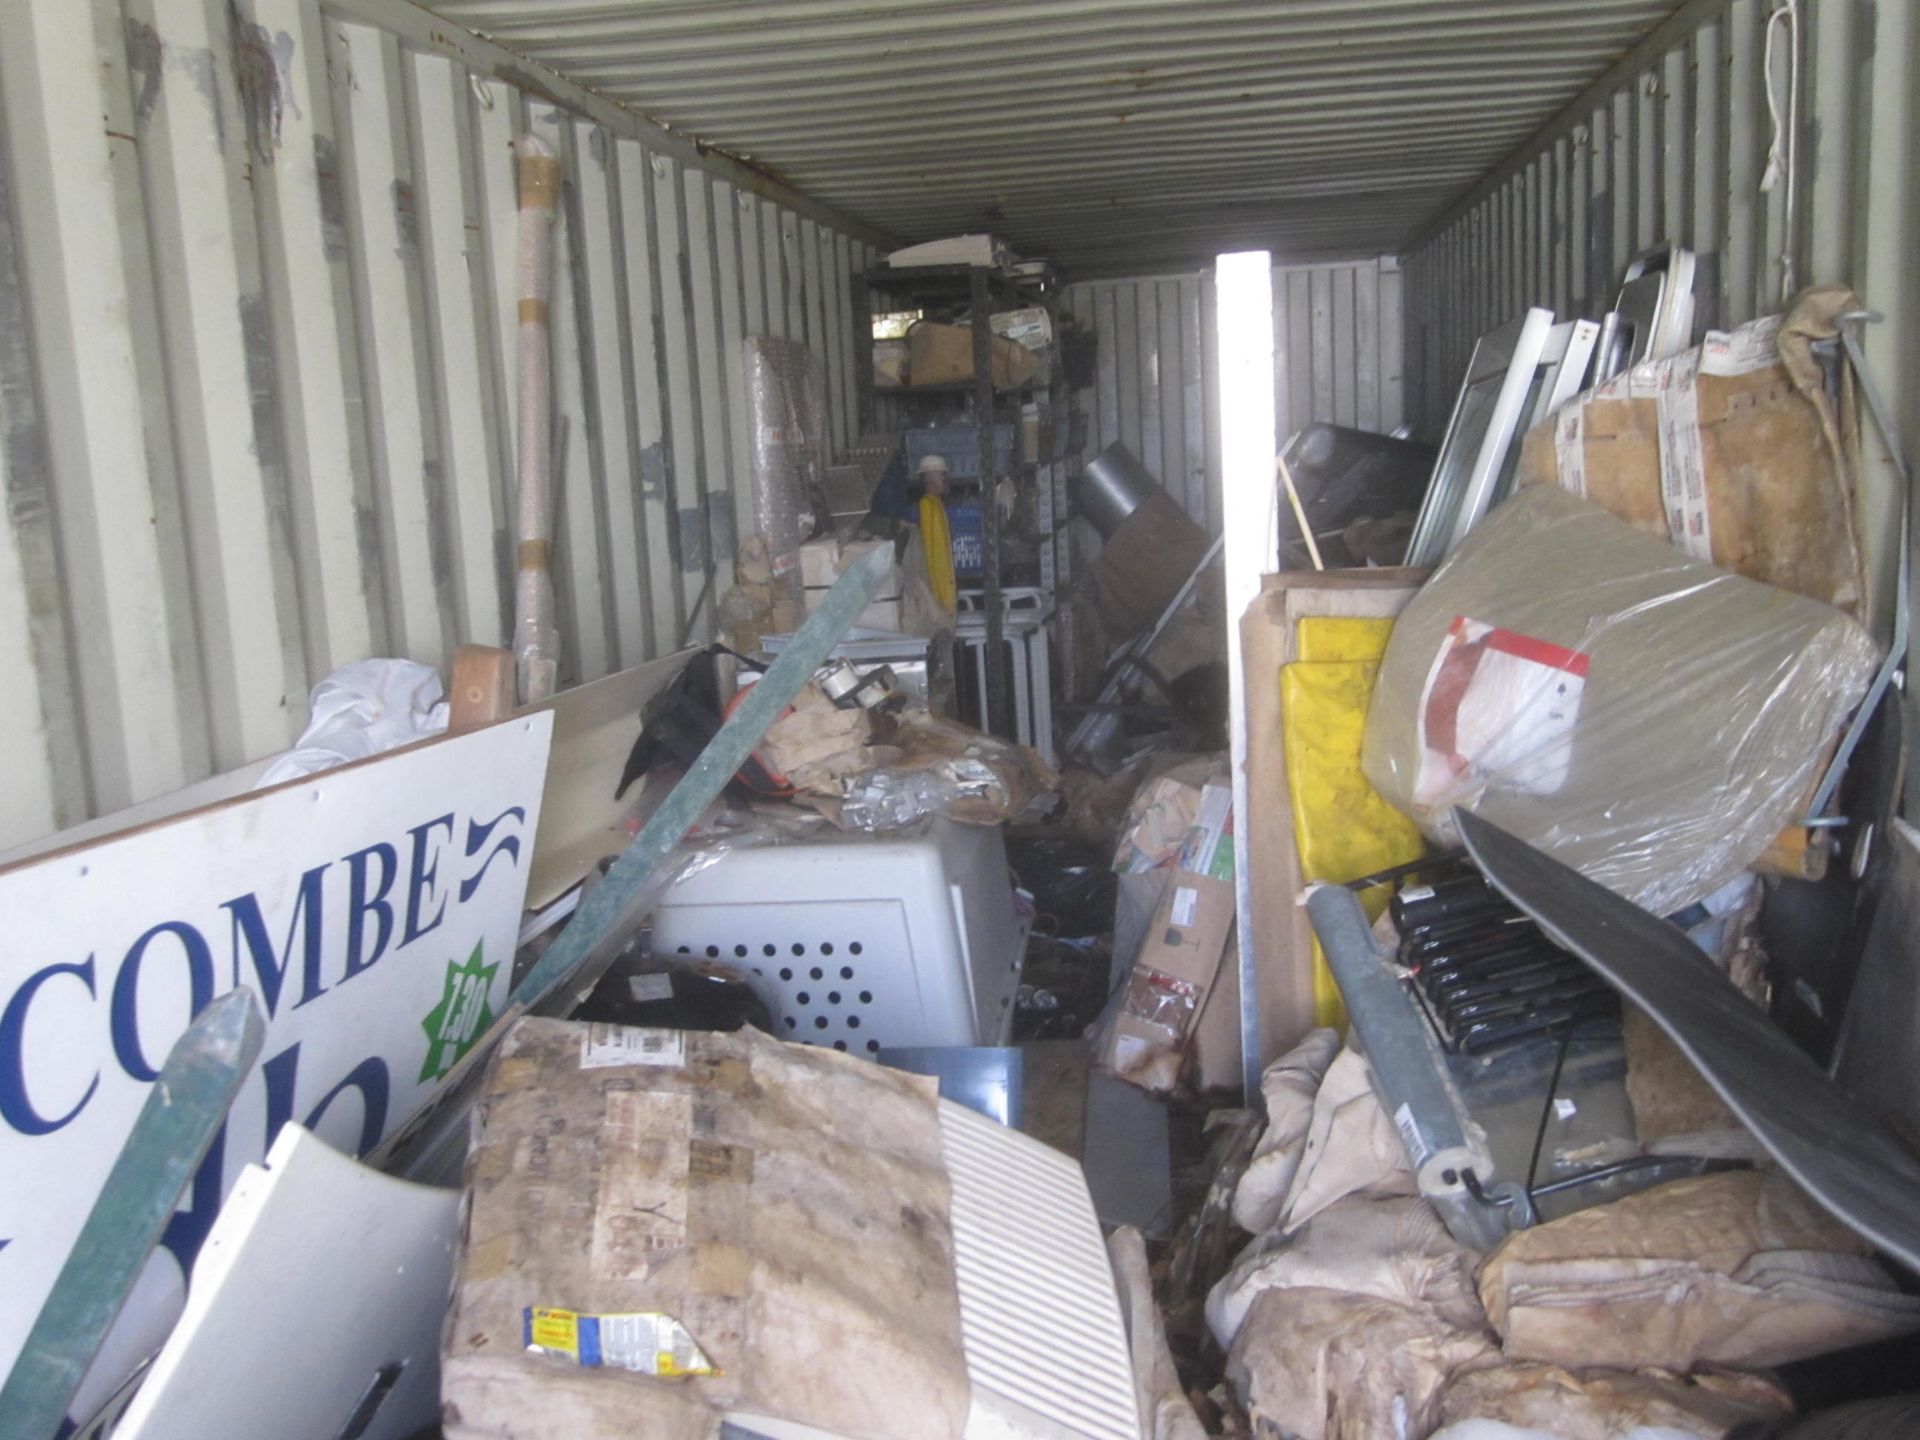 Loose contents of 40 ft storage container (outside)